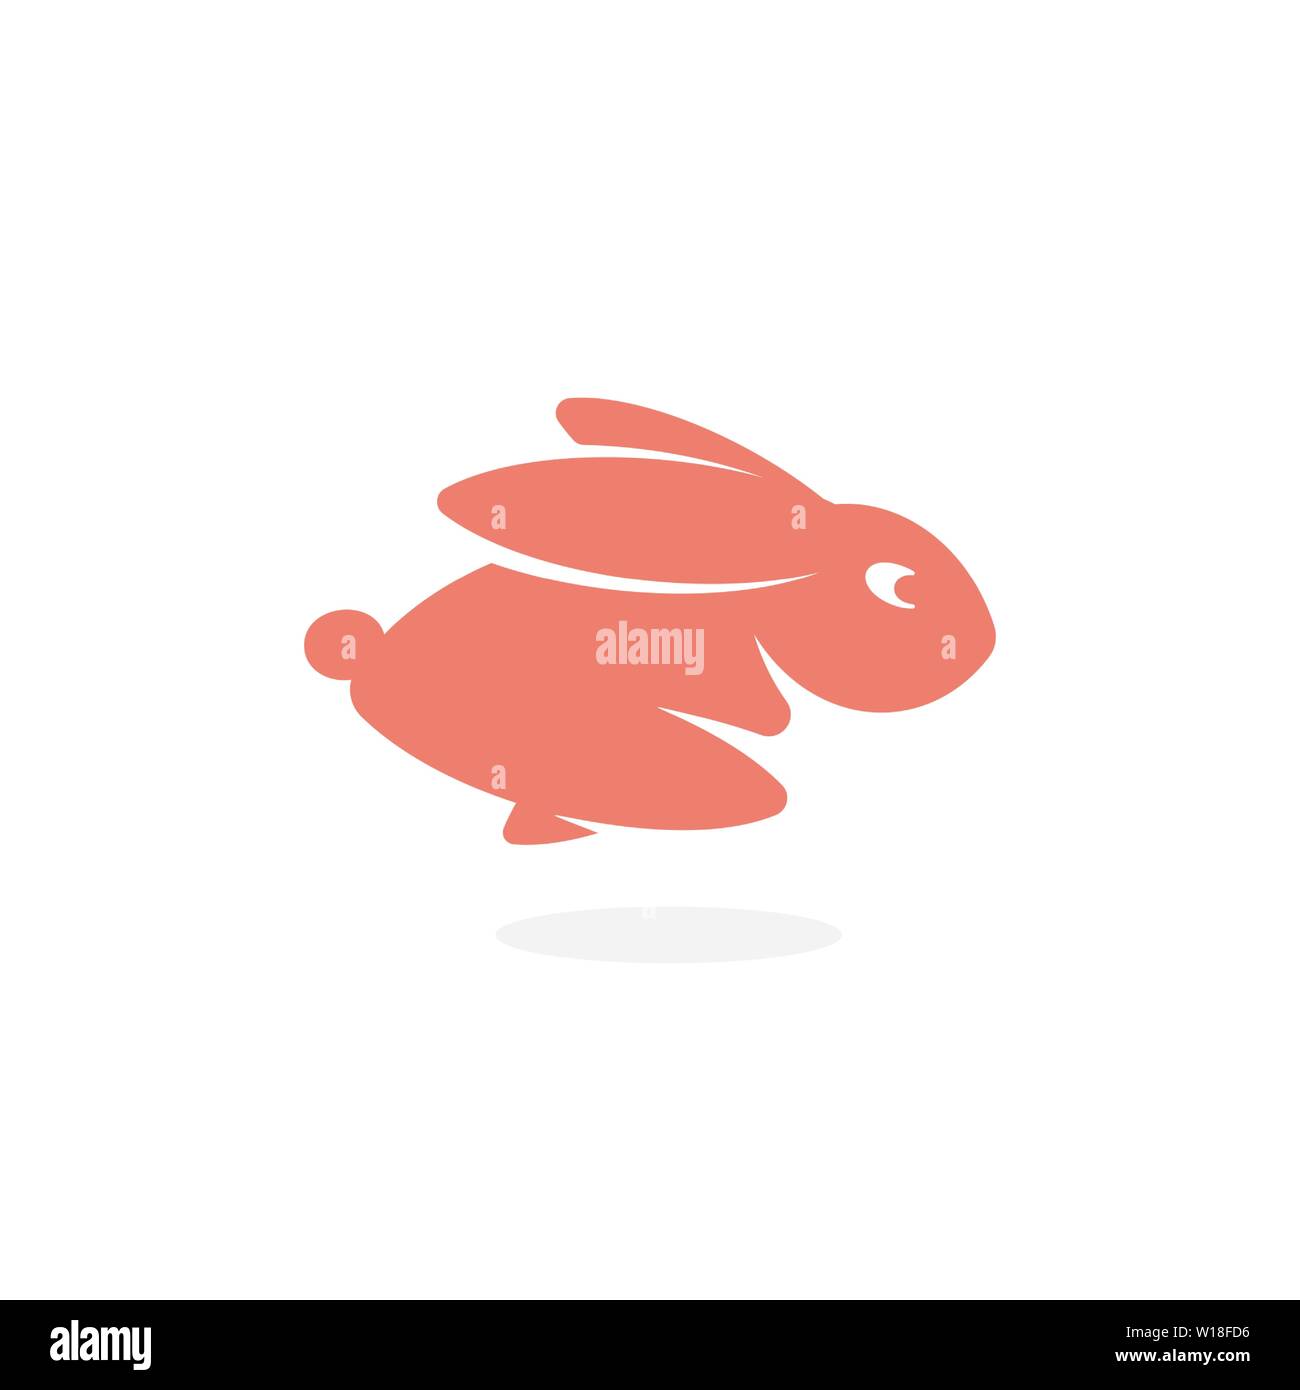 Pink Rabbit, fast running forward Hare, jumping Bunny. Wild animal icon. Simple silhouette logo template. Modern concept design for business. Isolated Stock Vector